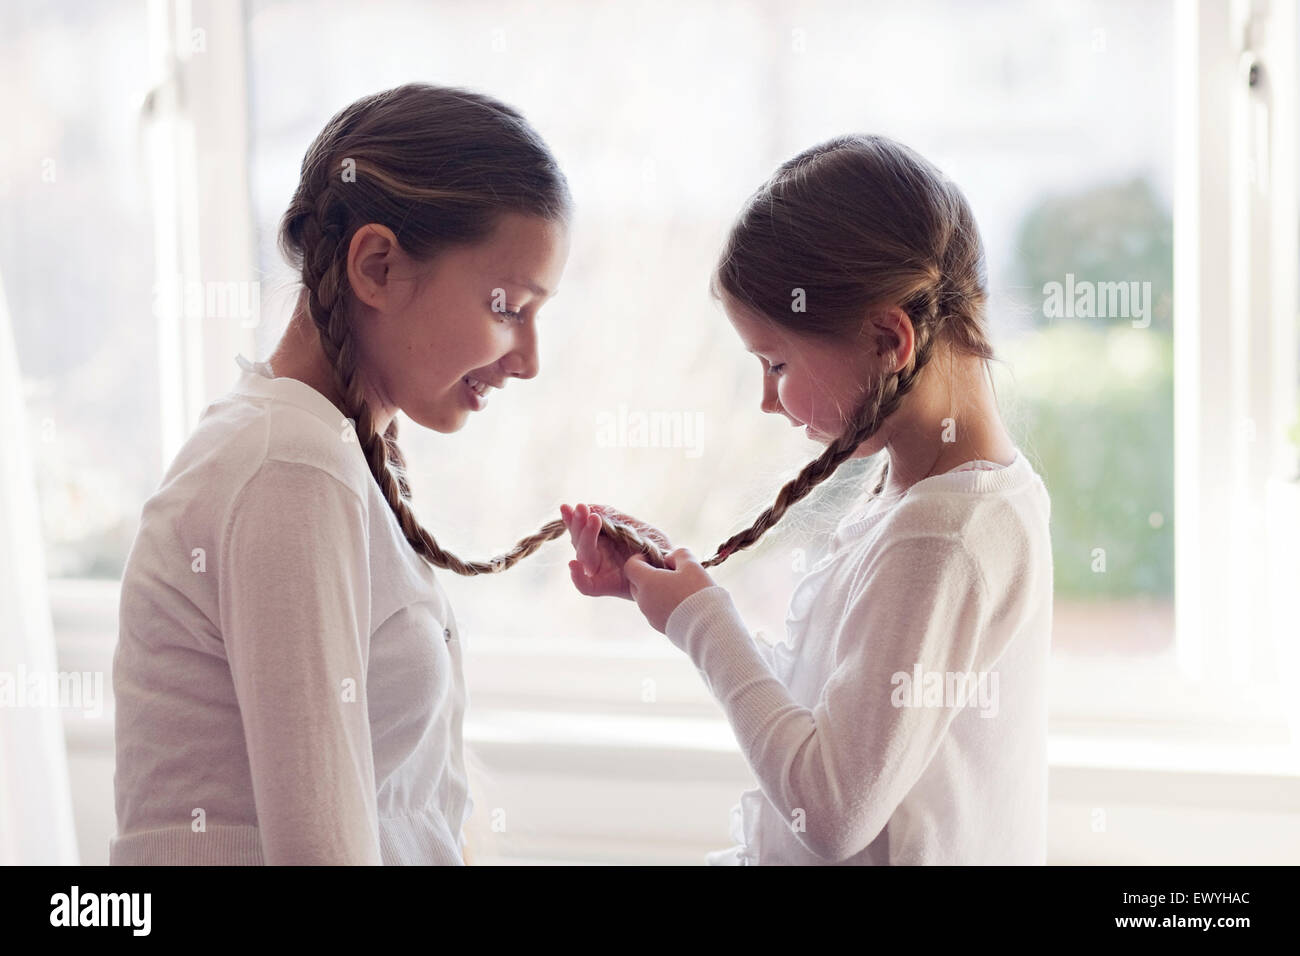 Two girls with their plaits tied together Stock Photo